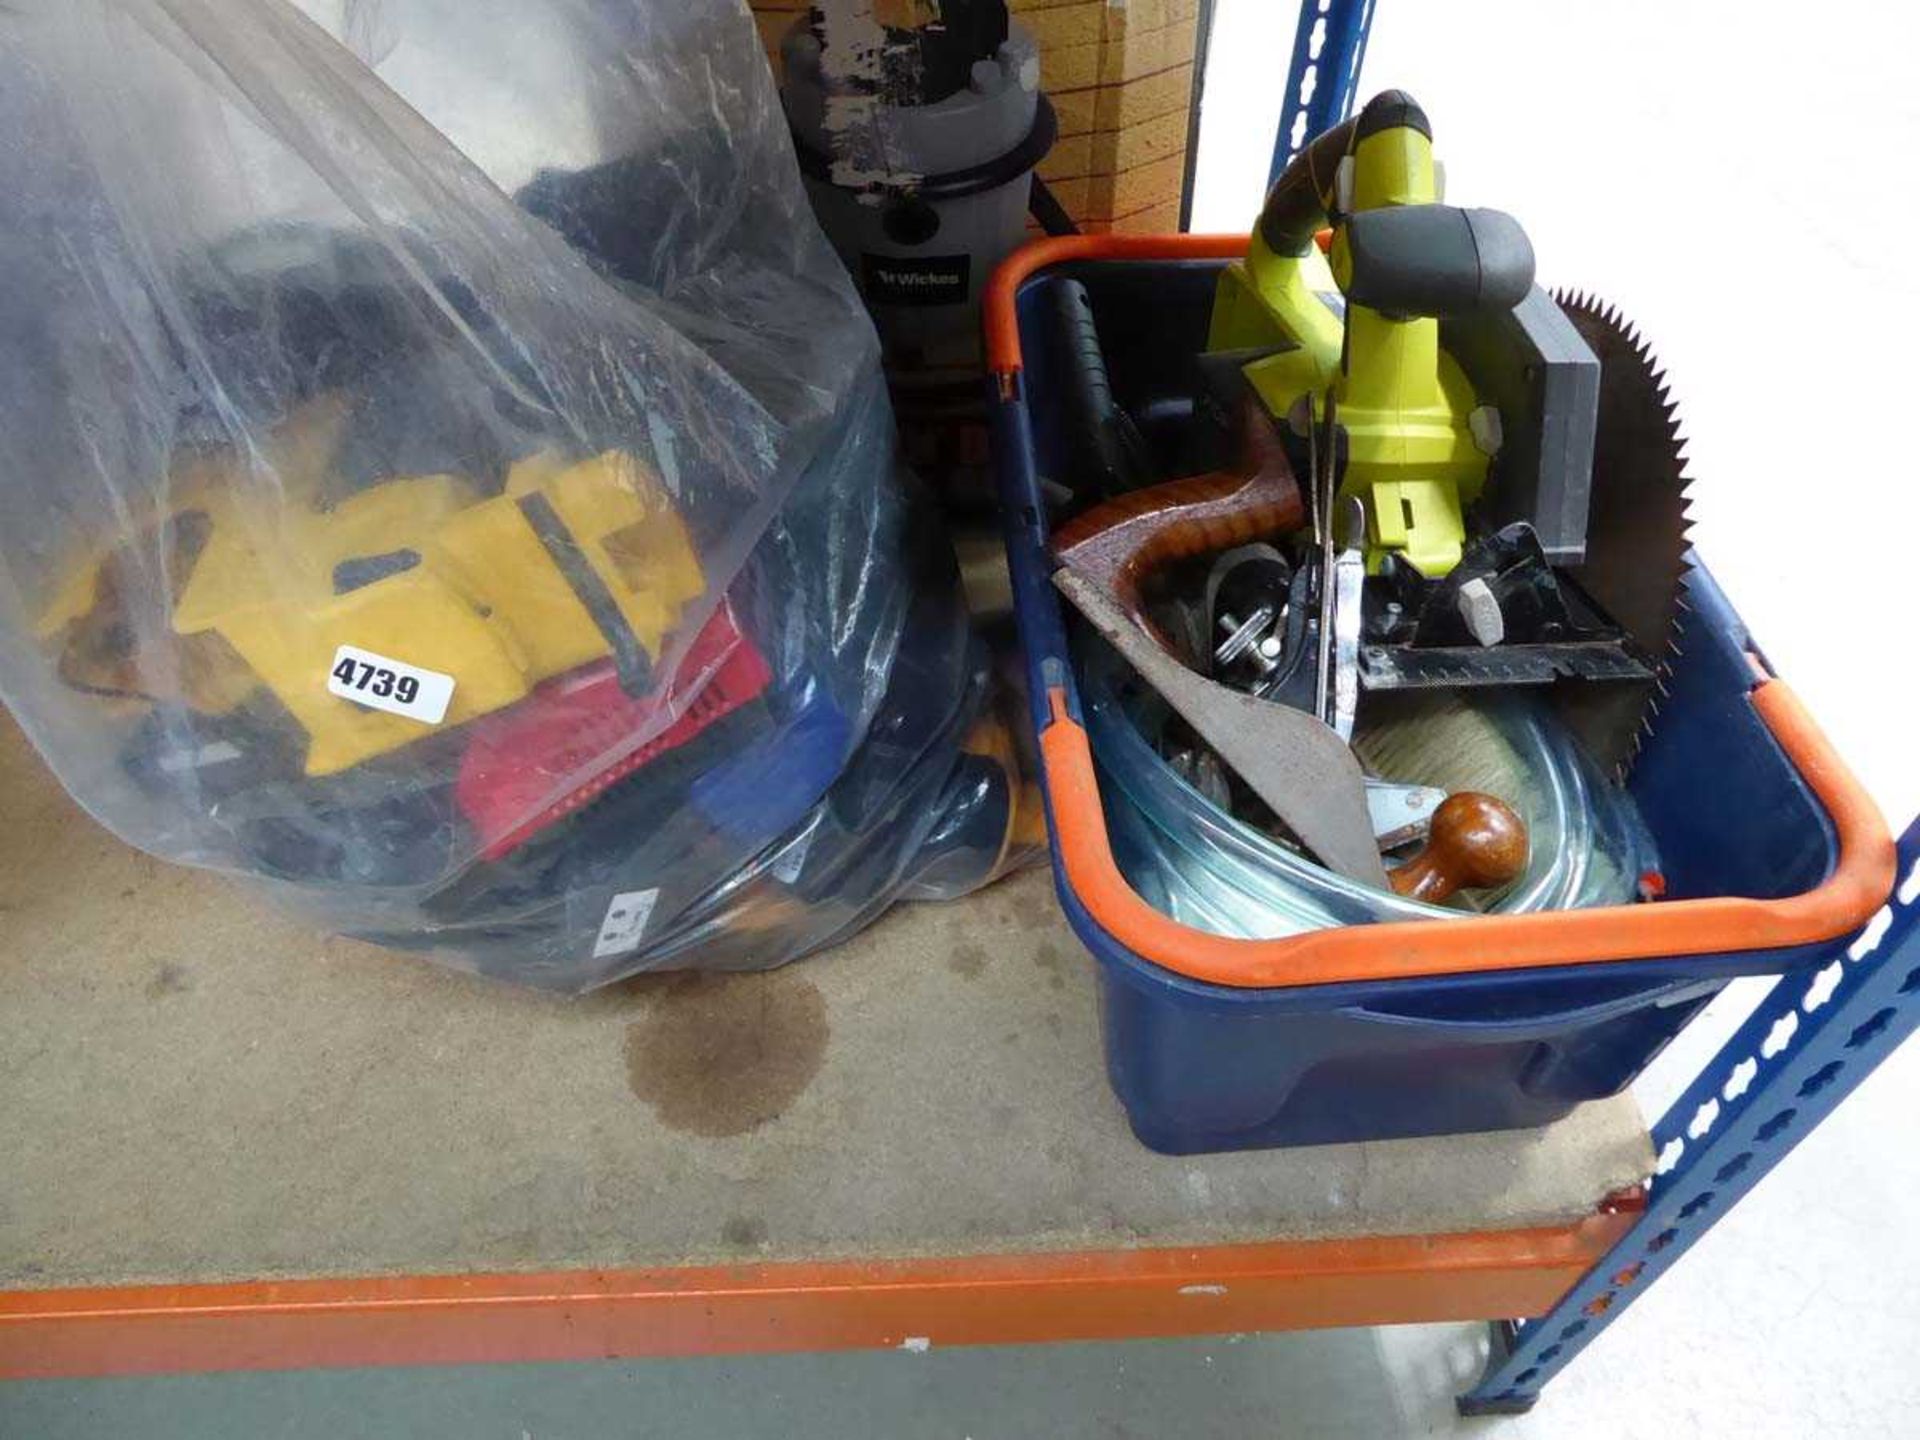 Bag of power tolls and box containing tools and power tools